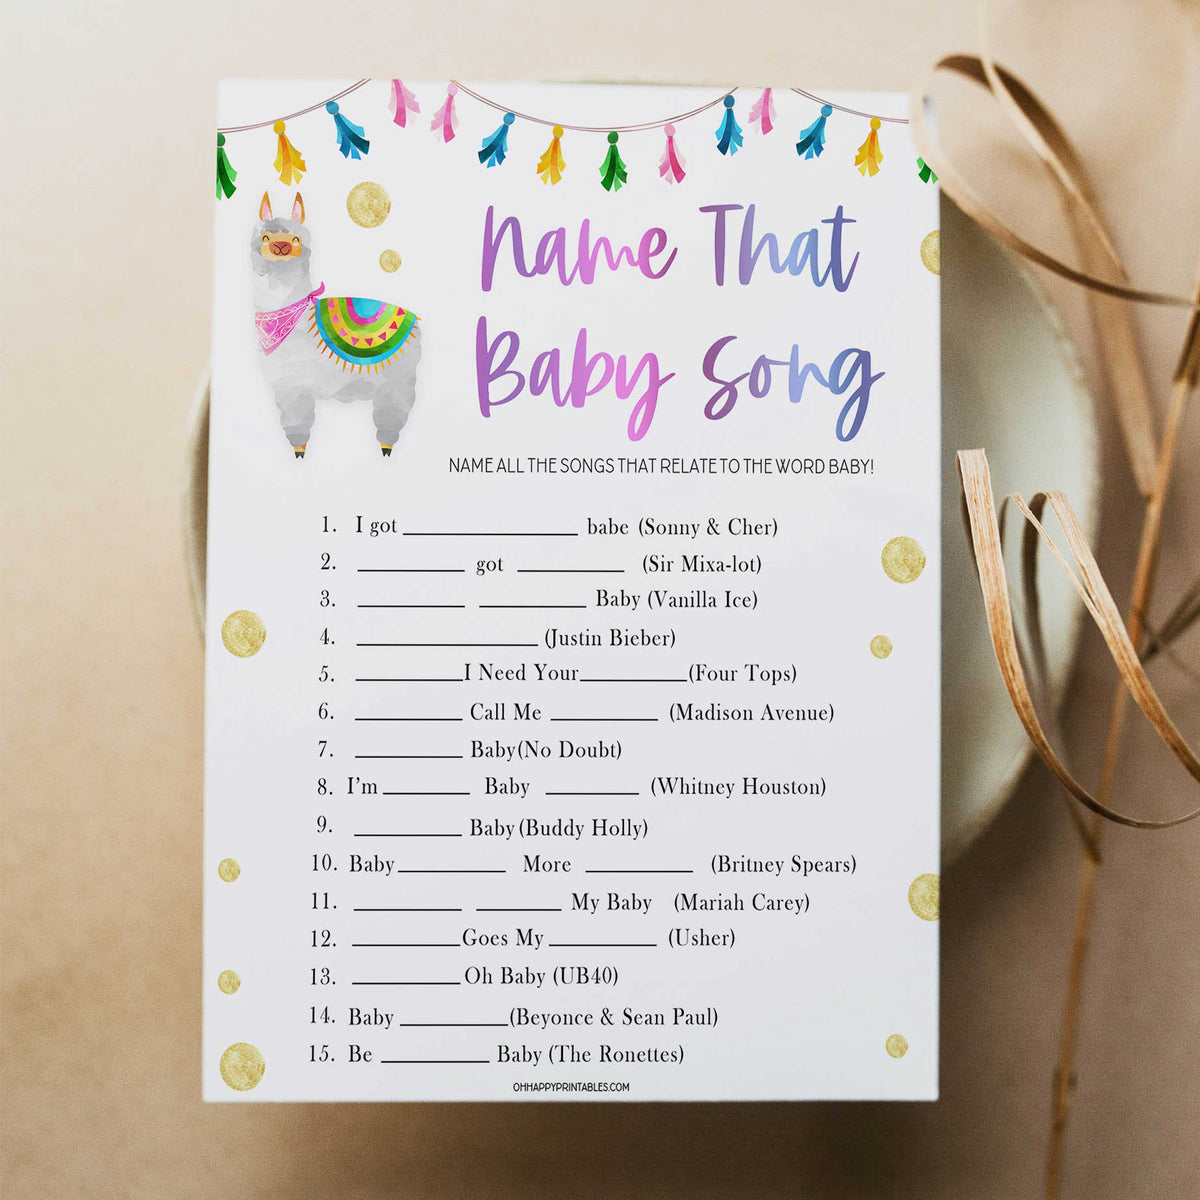 name that baby song game, Printable baby shower games, llama fiesta fun baby games, baby shower games, fun baby shower ideas, top baby shower ideas, Llama fiesta shower baby shower, fiesta baby shower ideas